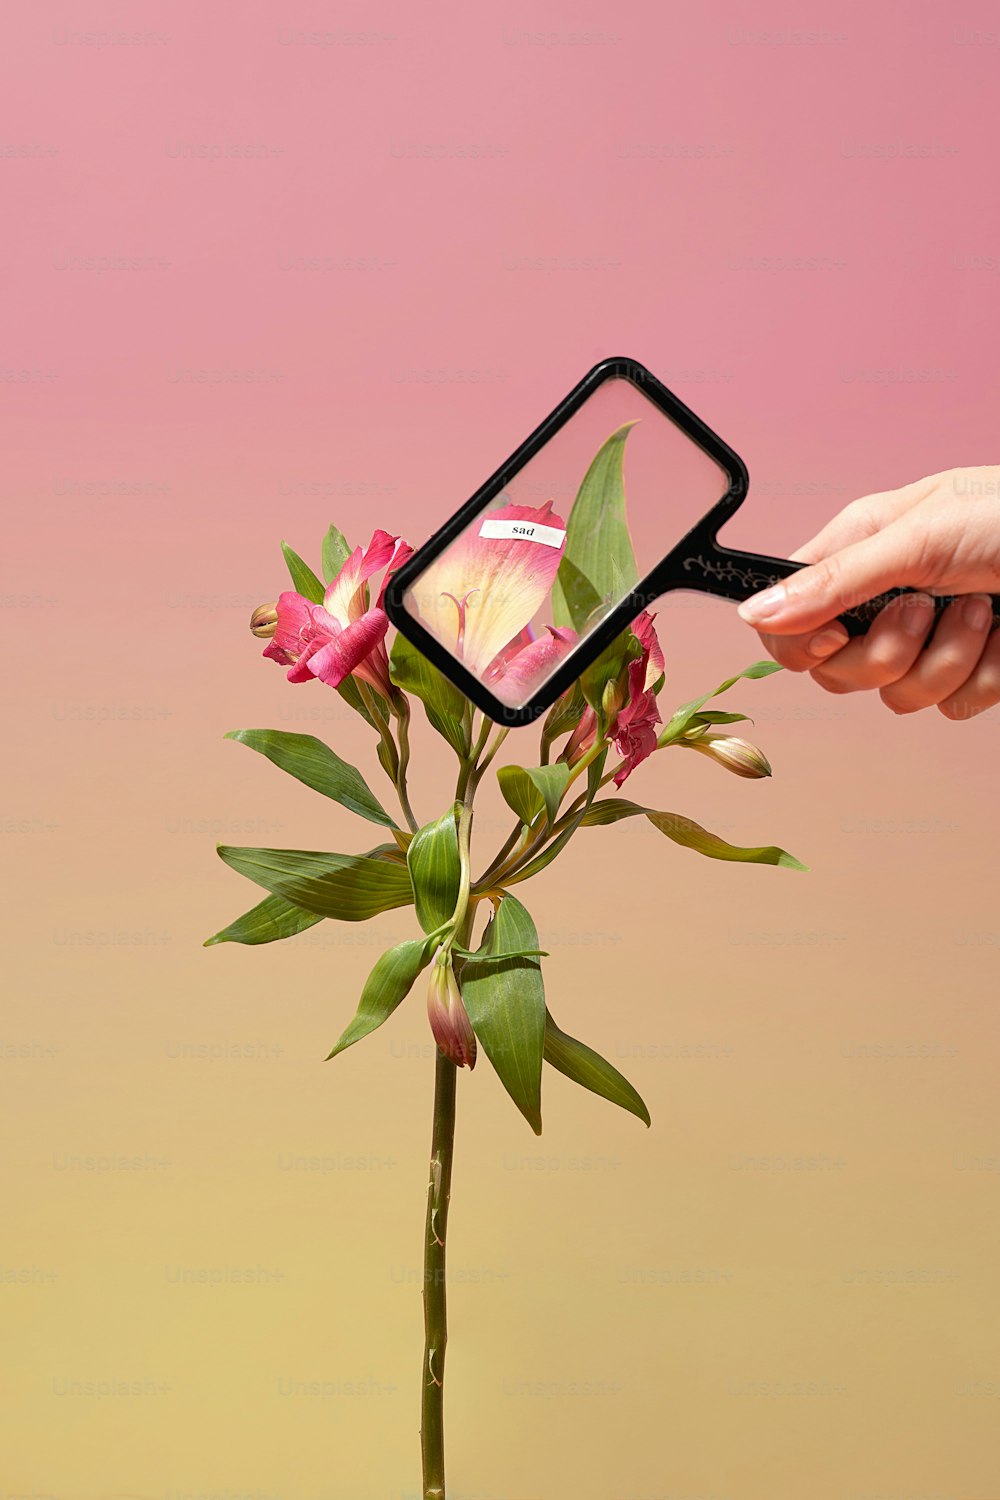 a person holding a magnifying glass over a flower